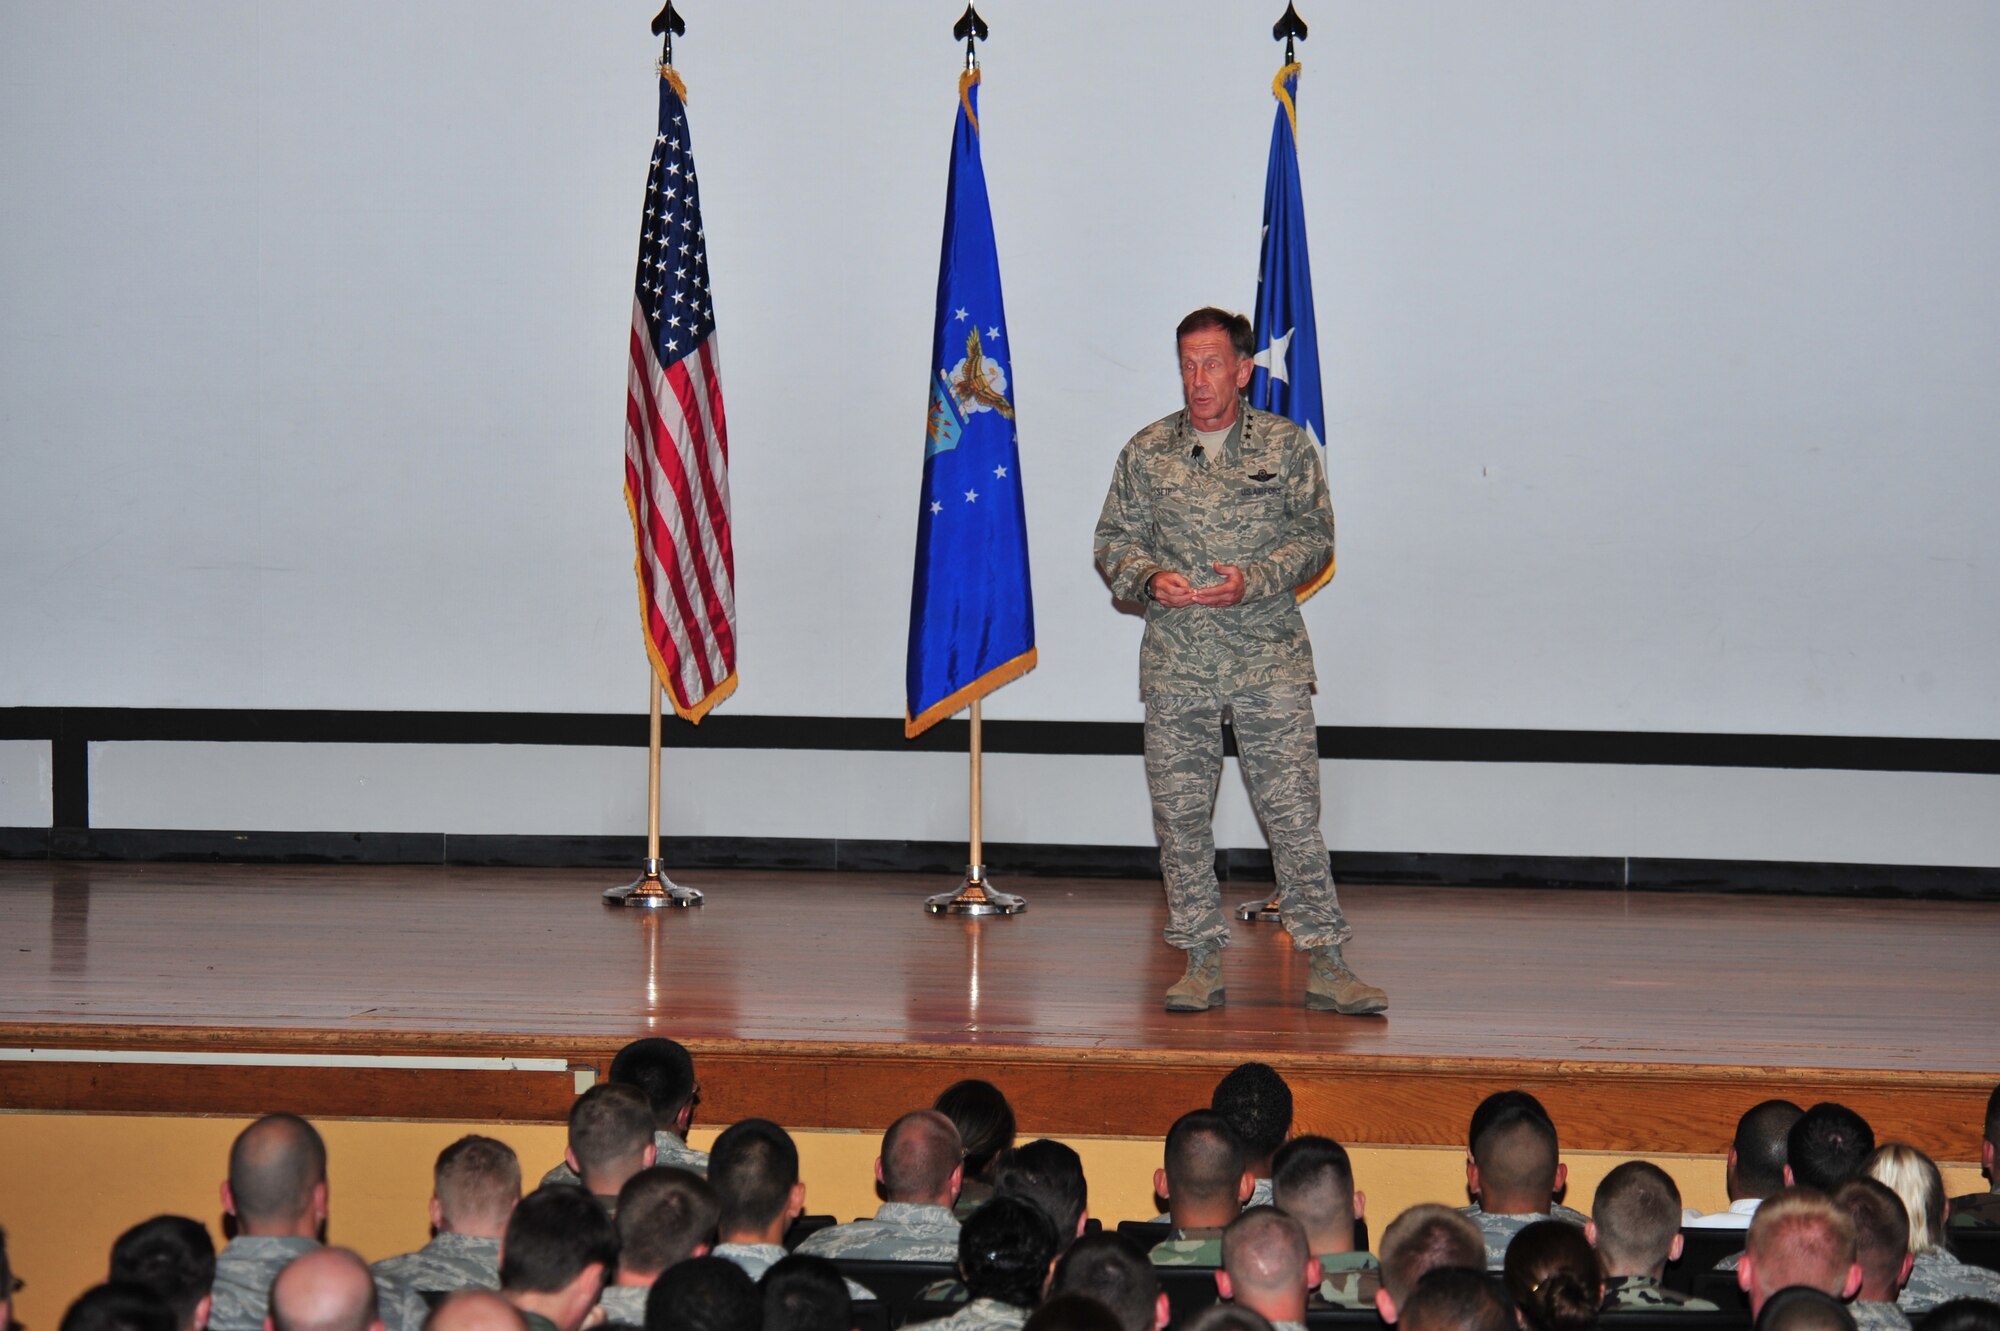 Lieutenant General Norman Seip wrapped up his visit to D-M with an enlisted call for E-6's and below at the base theater. During the E-call, his focus was on the four main priorities of the new Secretary and Chief of Staff of the Air Force. (U.S. Air Force photo/Senior Airman Noah R. Johnson)